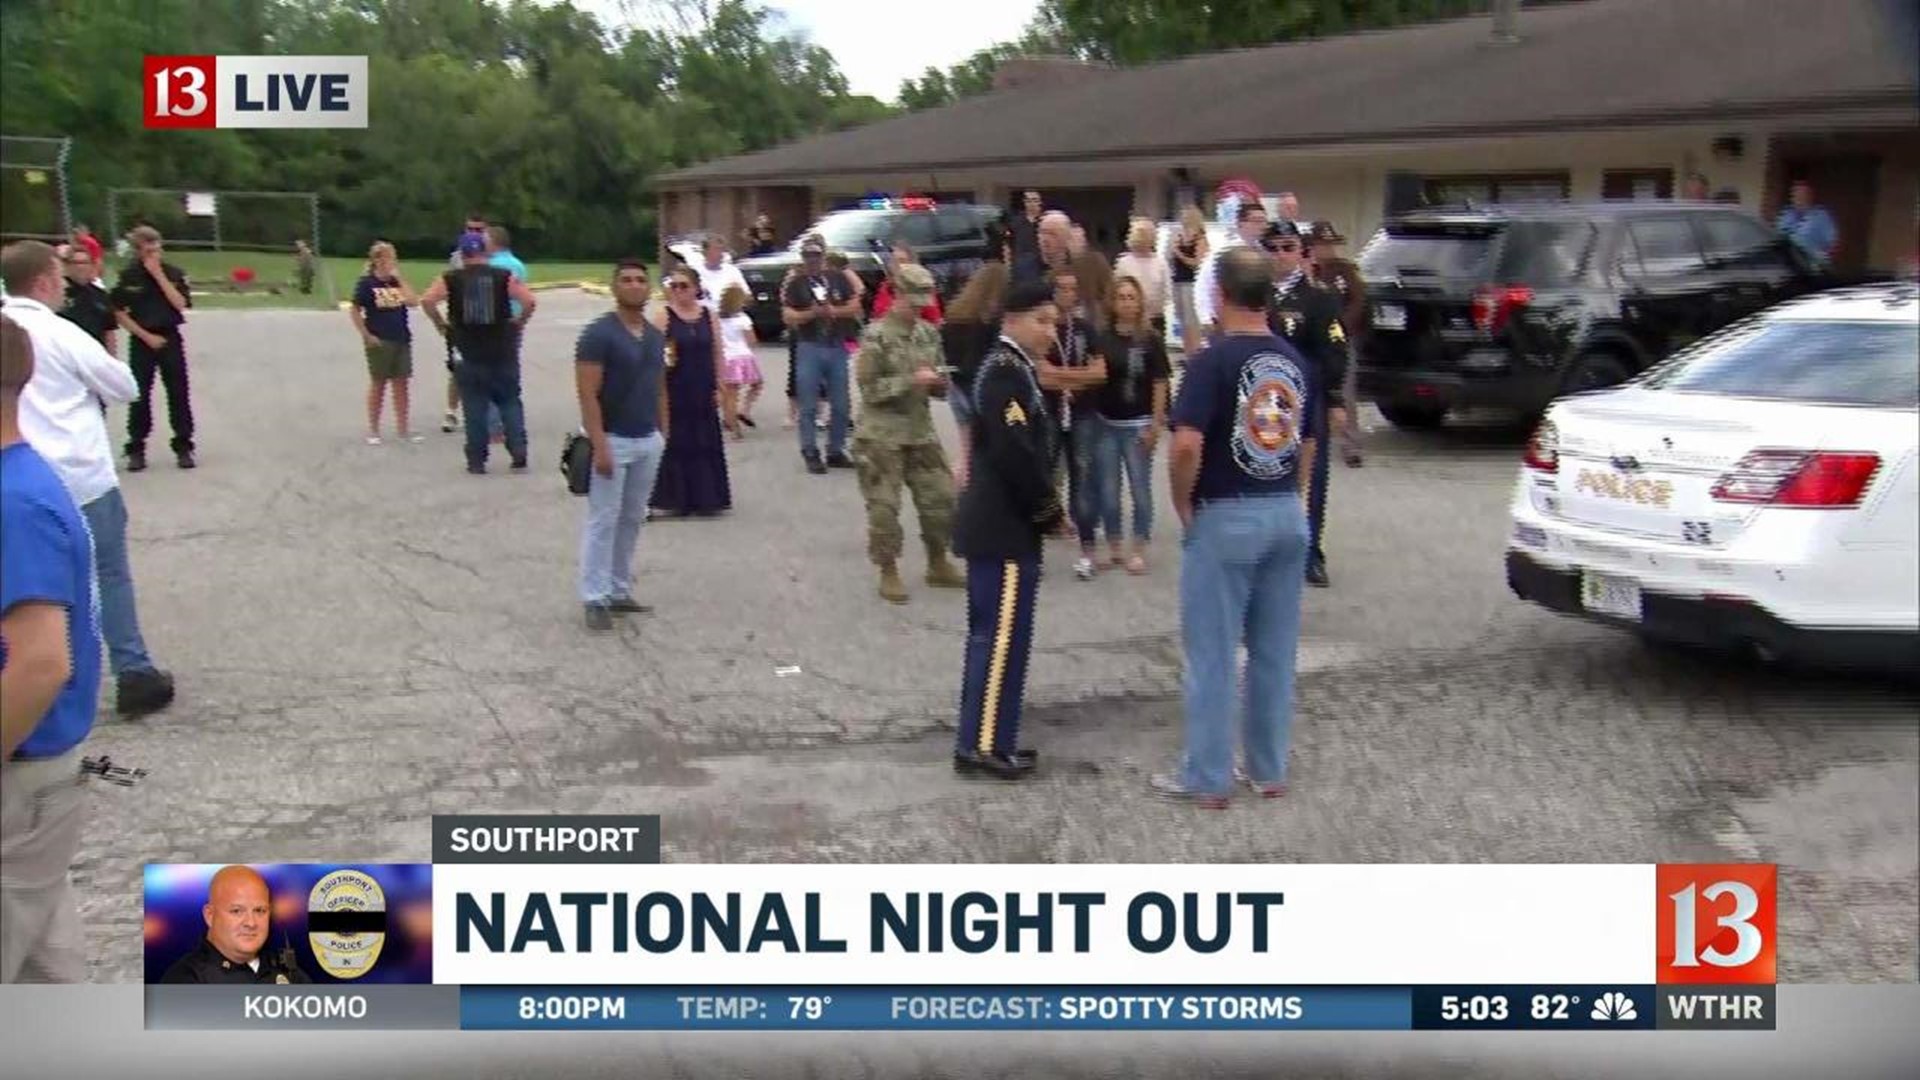 Southport National Night Out events go on as planned